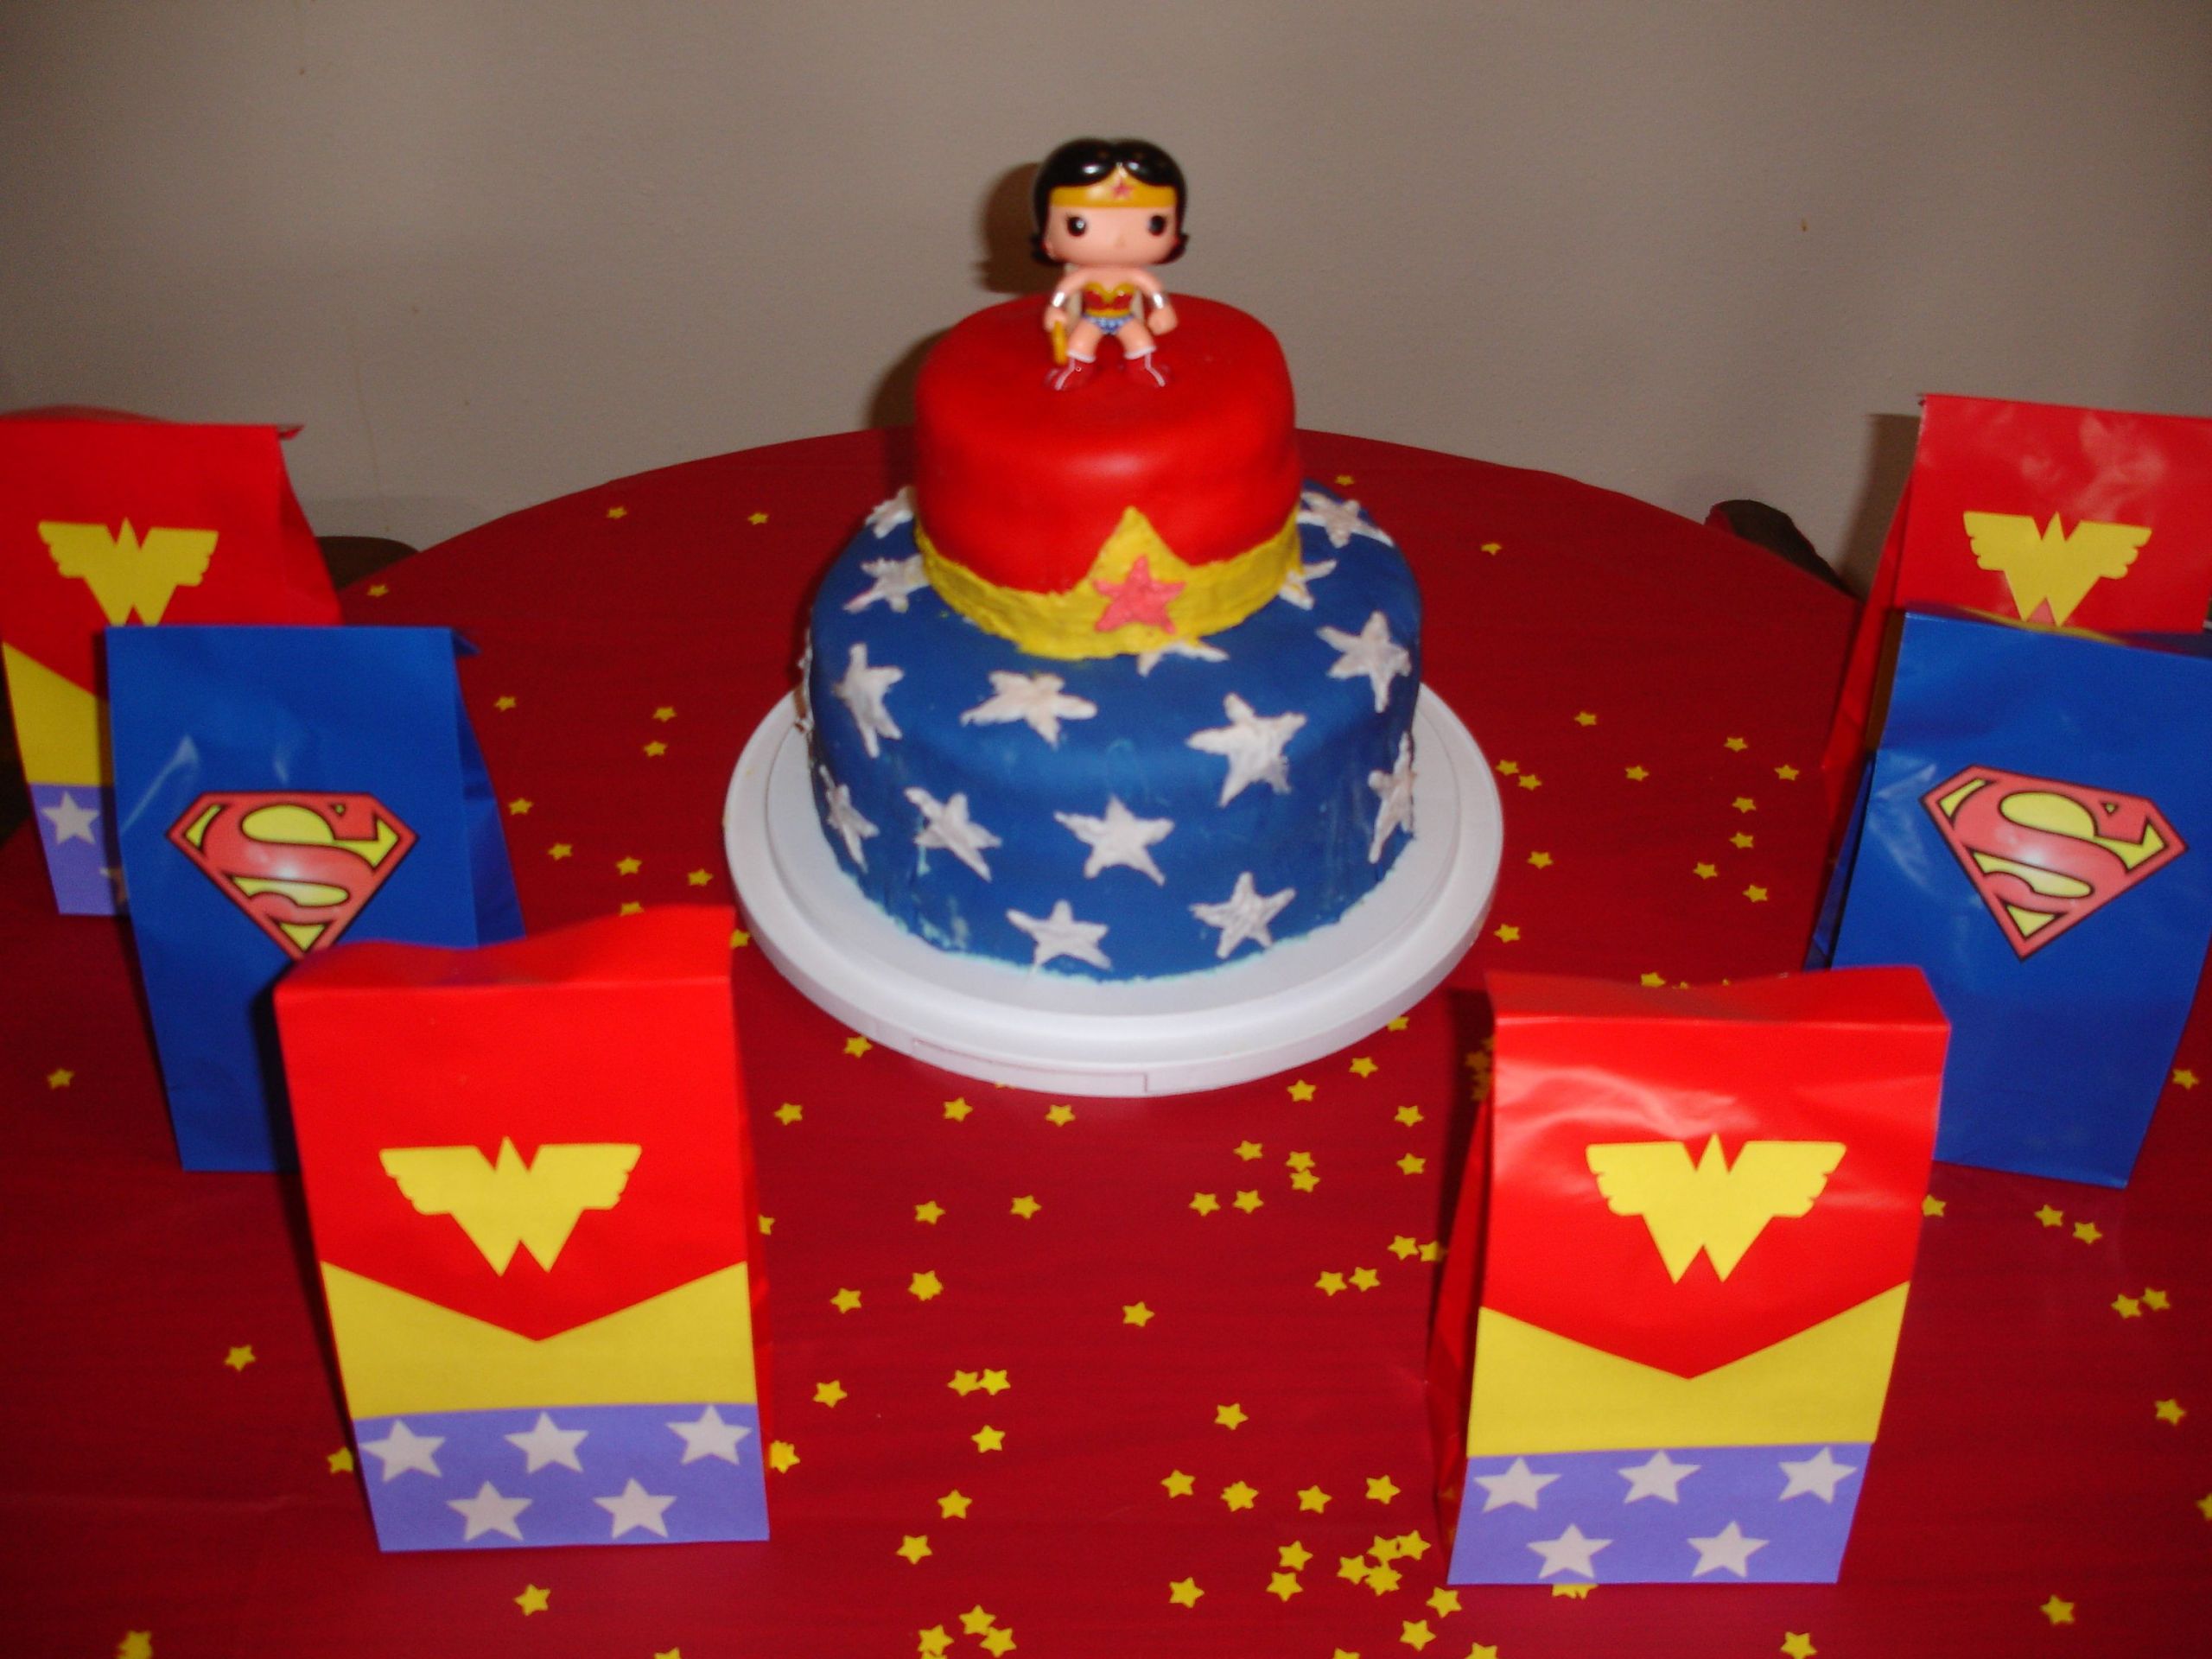 Wonder Woman Birthday Party Supplies
 Wonder Woman Party Cake and Favor Bags